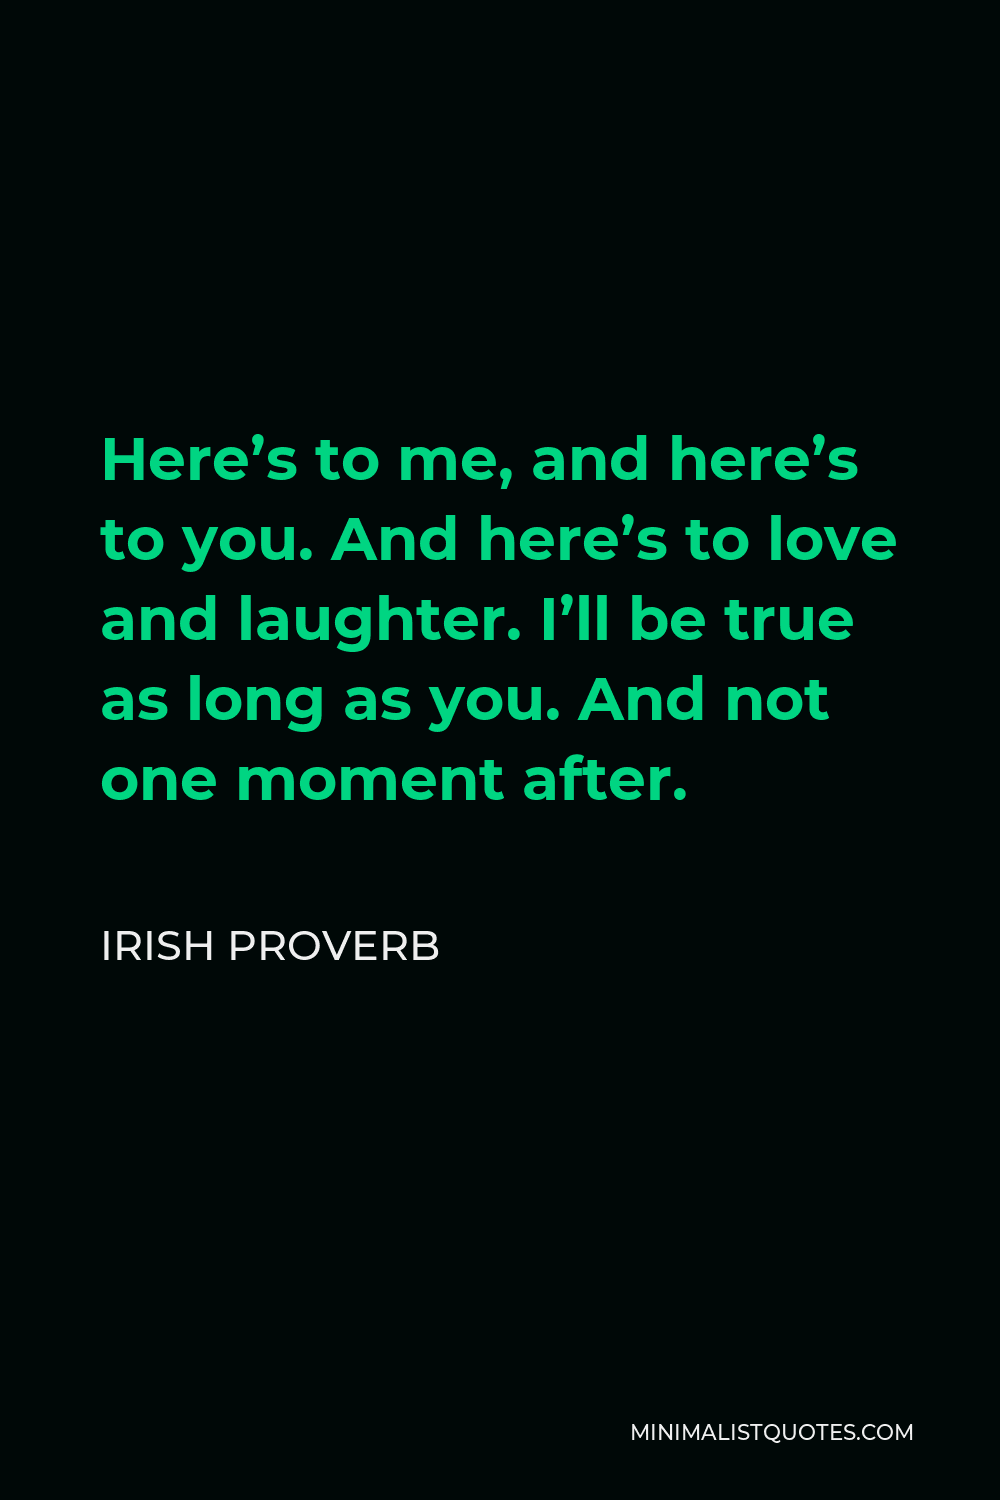 Irish Proverb Quote - Here’s to me, and here’s to you. And here’s to love and laughter. I’ll be true as long as you. And not one moment after.